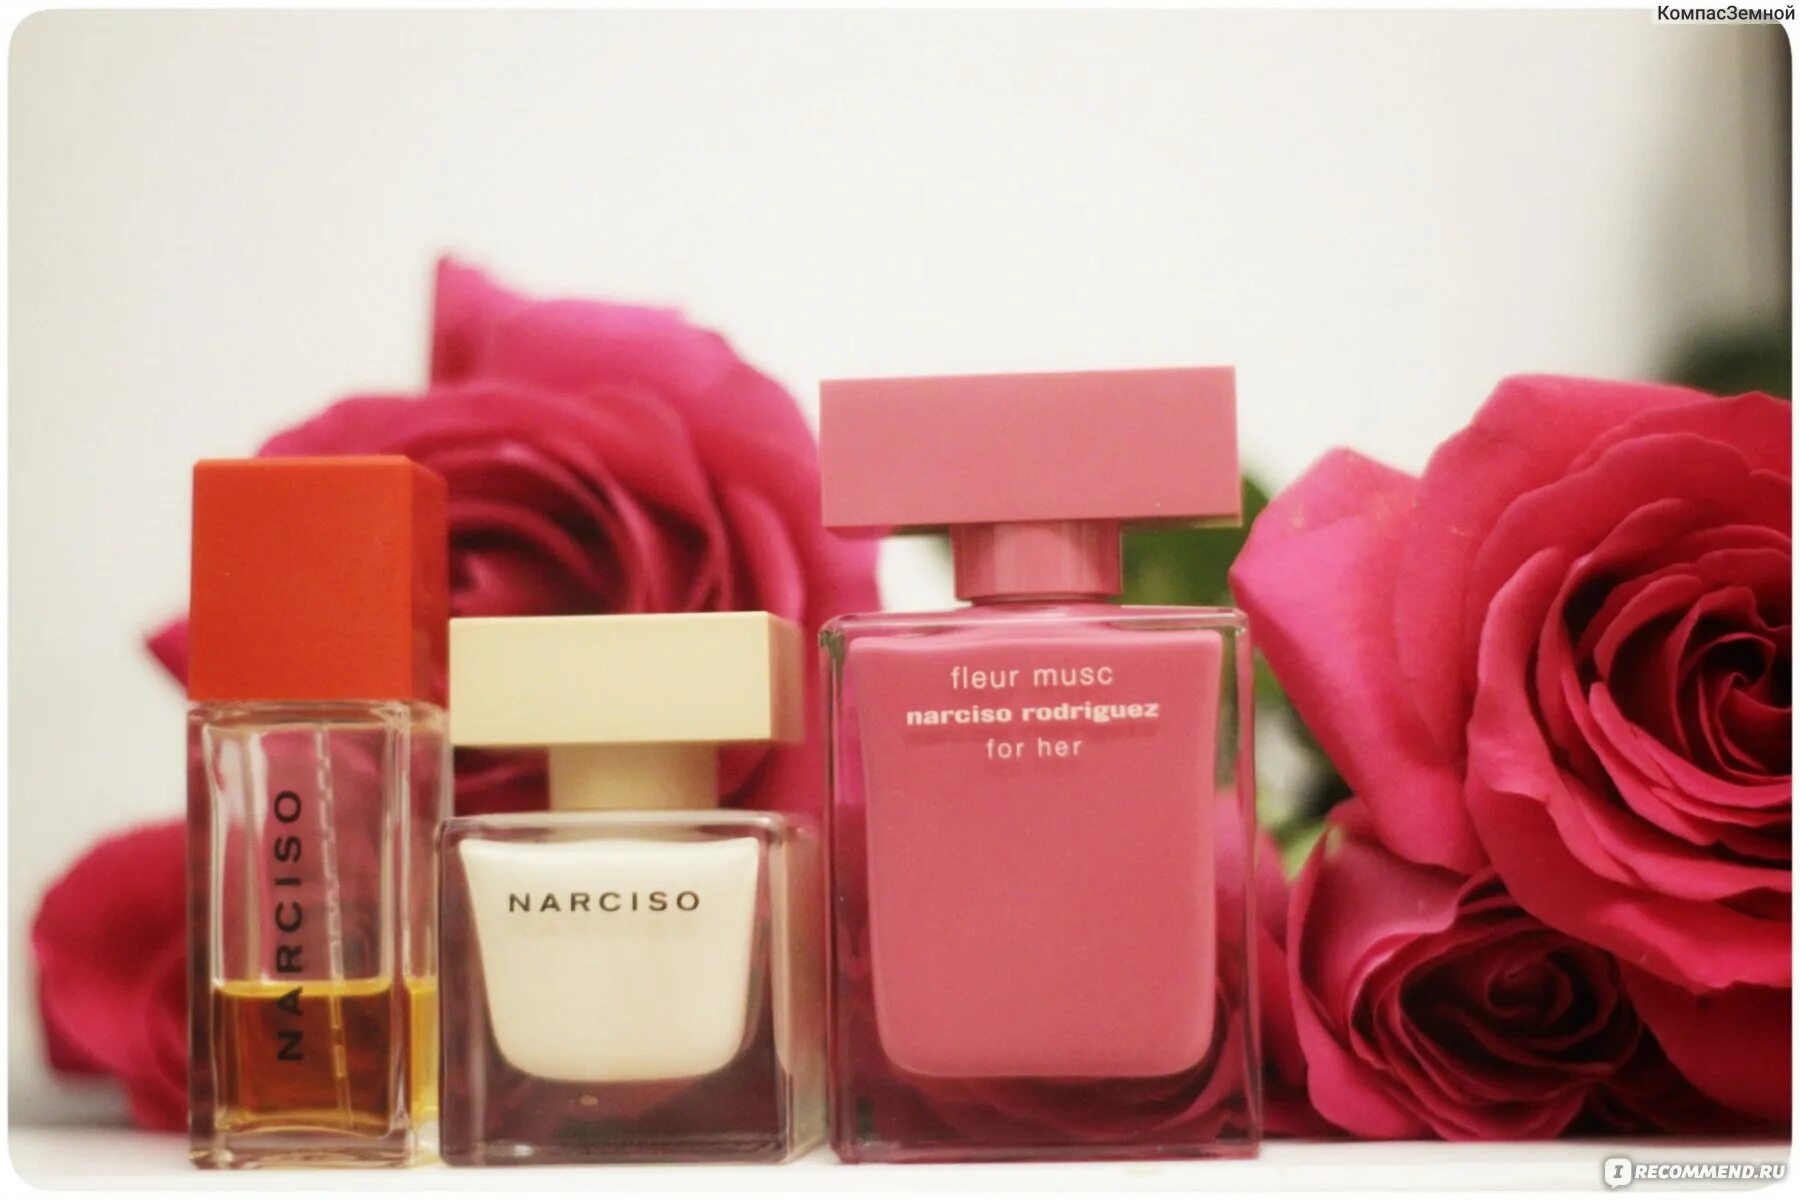 Narciso rodriguez musc noir rose for her. Парфюмерная вода Narciso Rodriguez fleur Musc for her 100 мл (Euro). L.12.12 Eau de Parfum Rose for her. Нарциссо Родригес Флер Маск вес флакона 30 мл с крышкой.